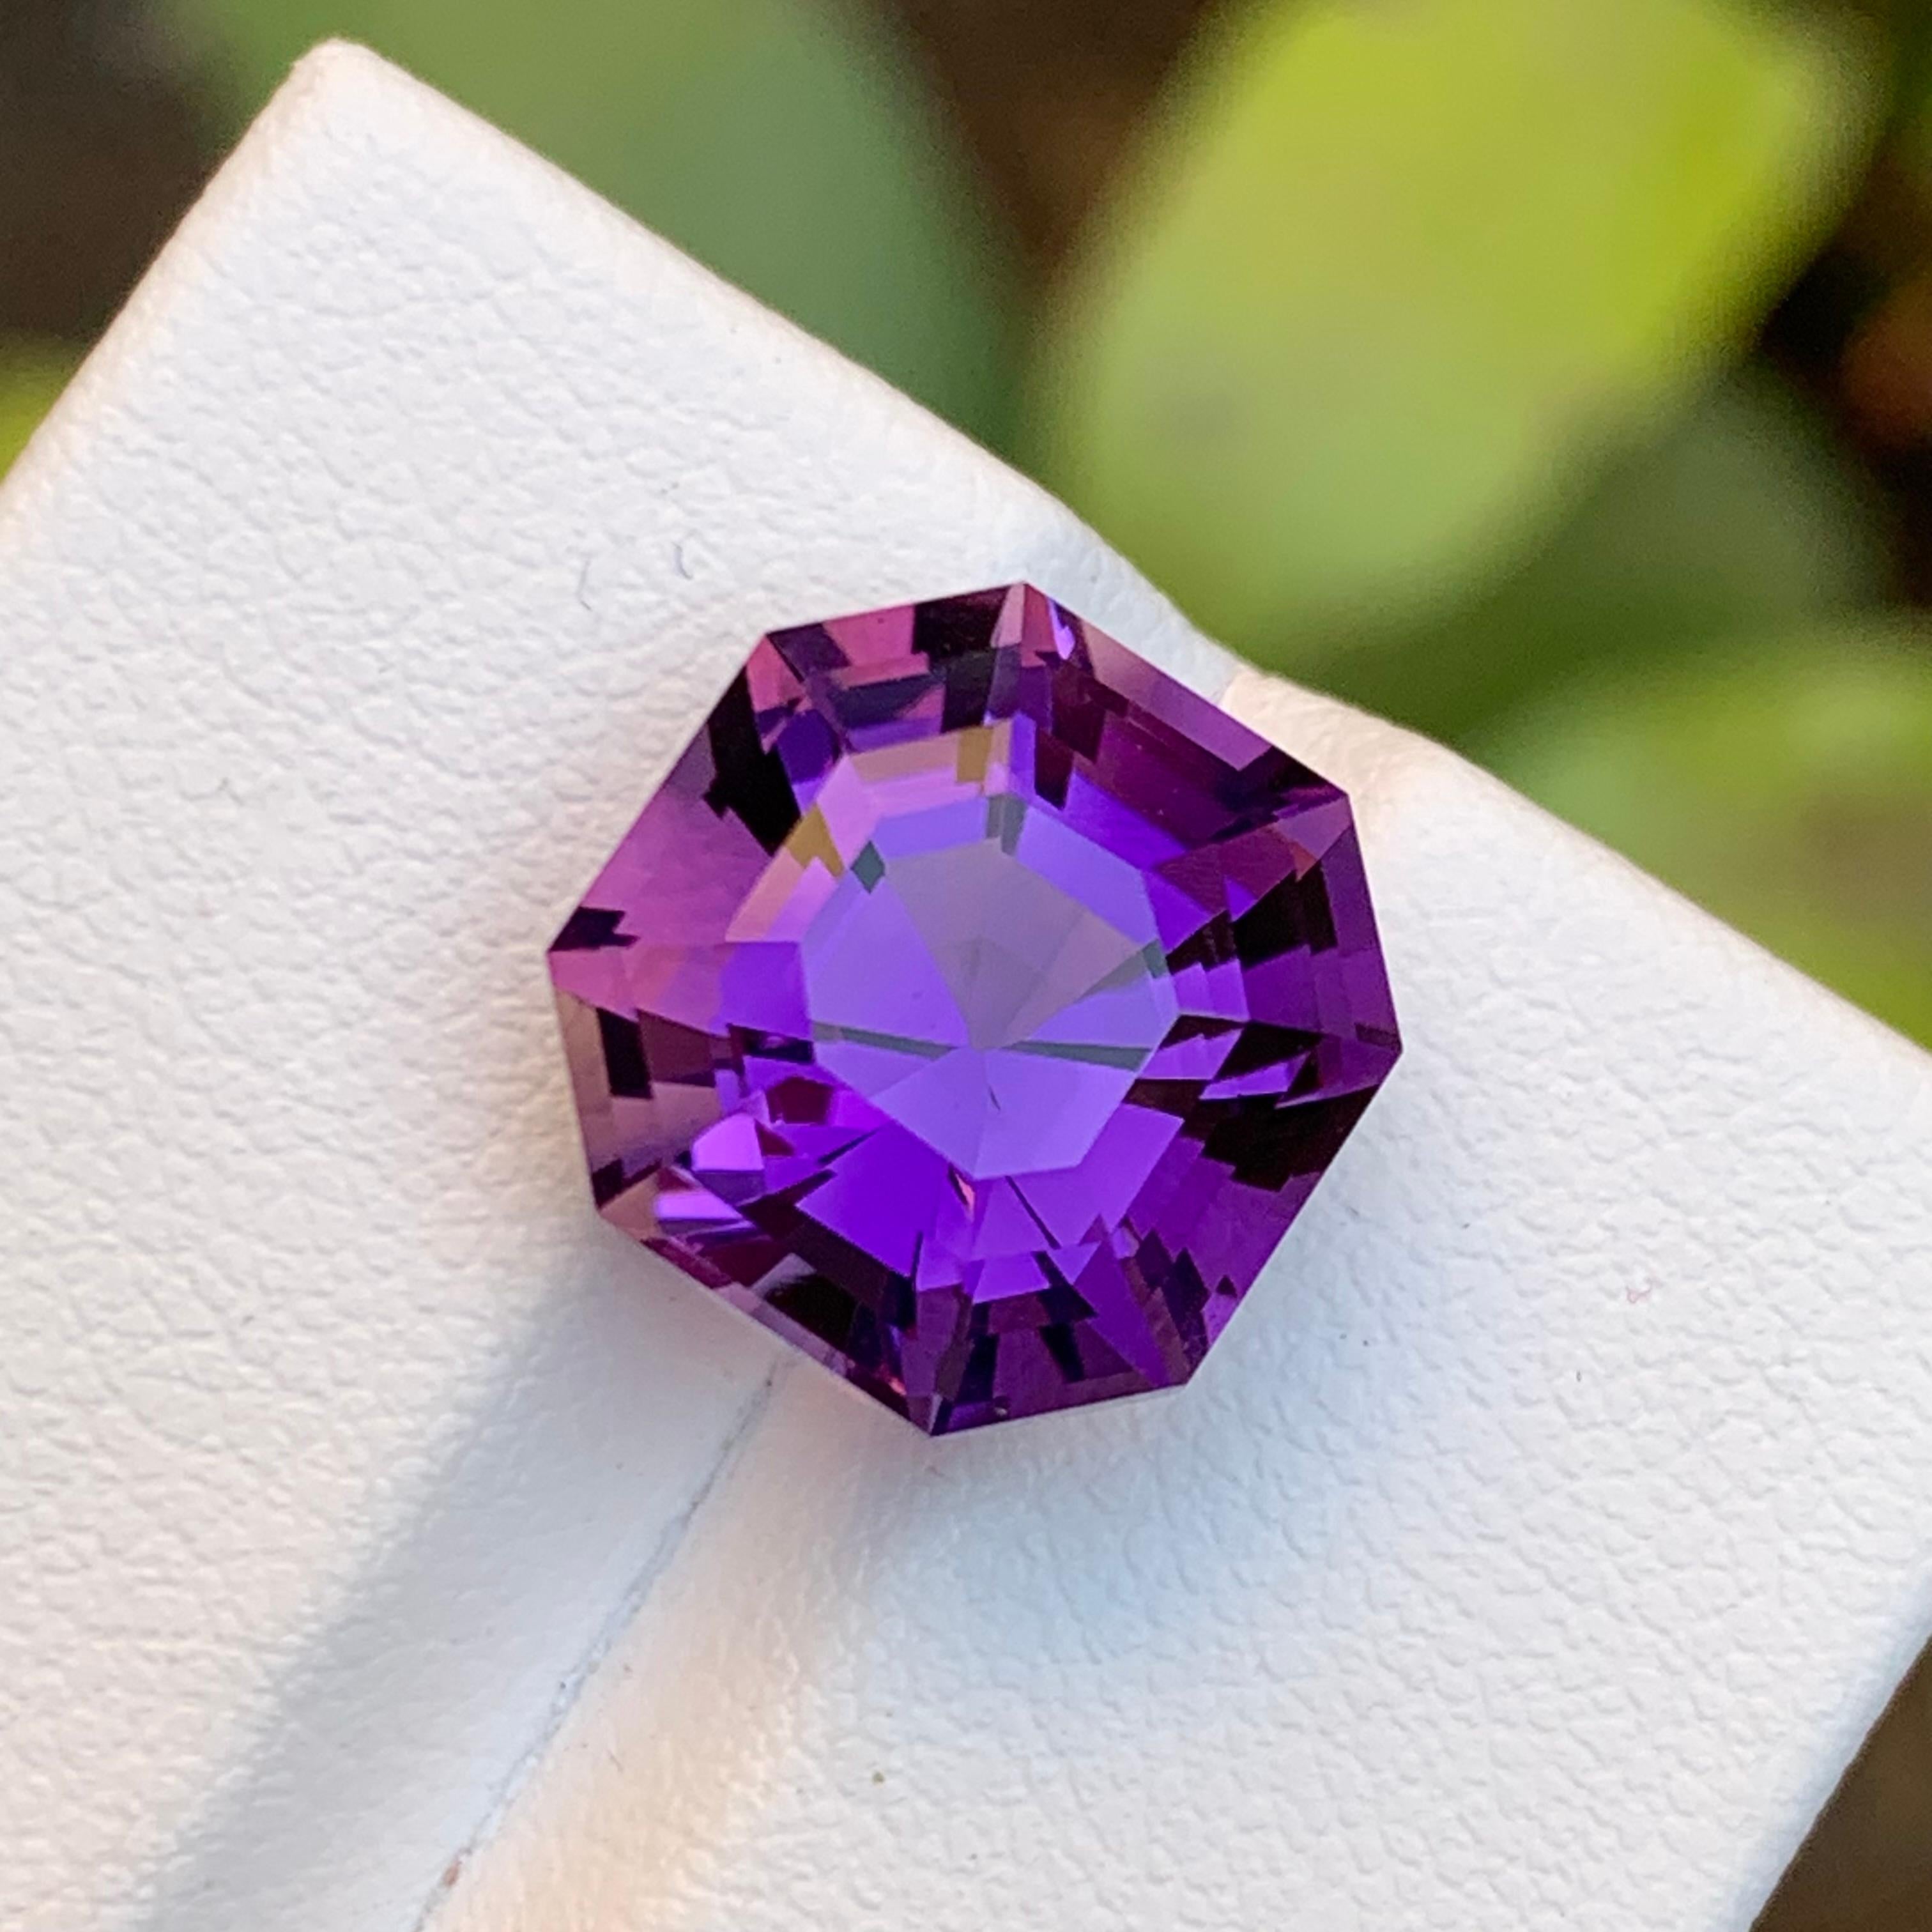 Introducing our exquisite Purple Amethyst, a mesmerizing gemstone weighing 8.40 Carat. Meticulously crafted in the timeless Octagon Asscher cut, its stunning facets showcase the gem's natural beauty. Perfect for a refined lady or gentleman seeking a